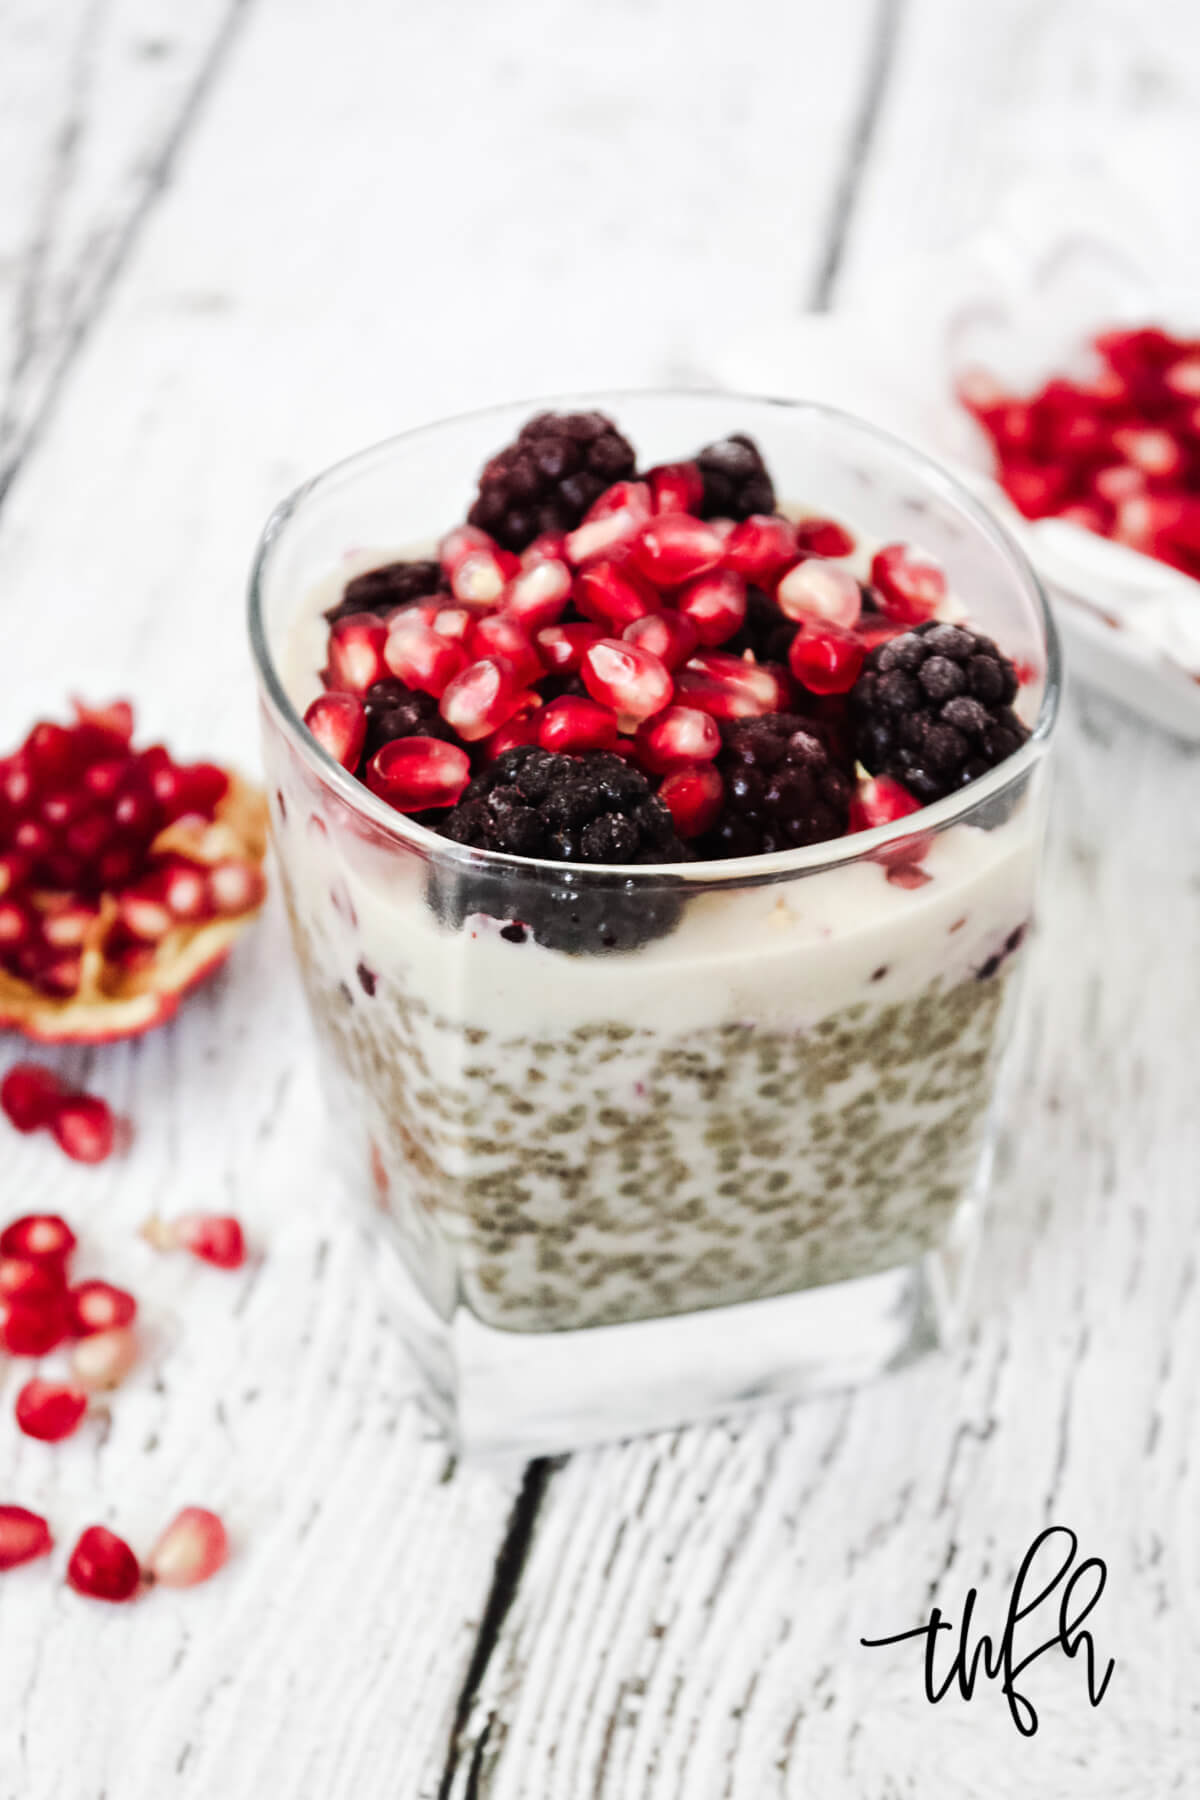 Vertical image of a square dessert glass filled with chia pudding topped with blackberries and pomegranates on a weathered wooden surface